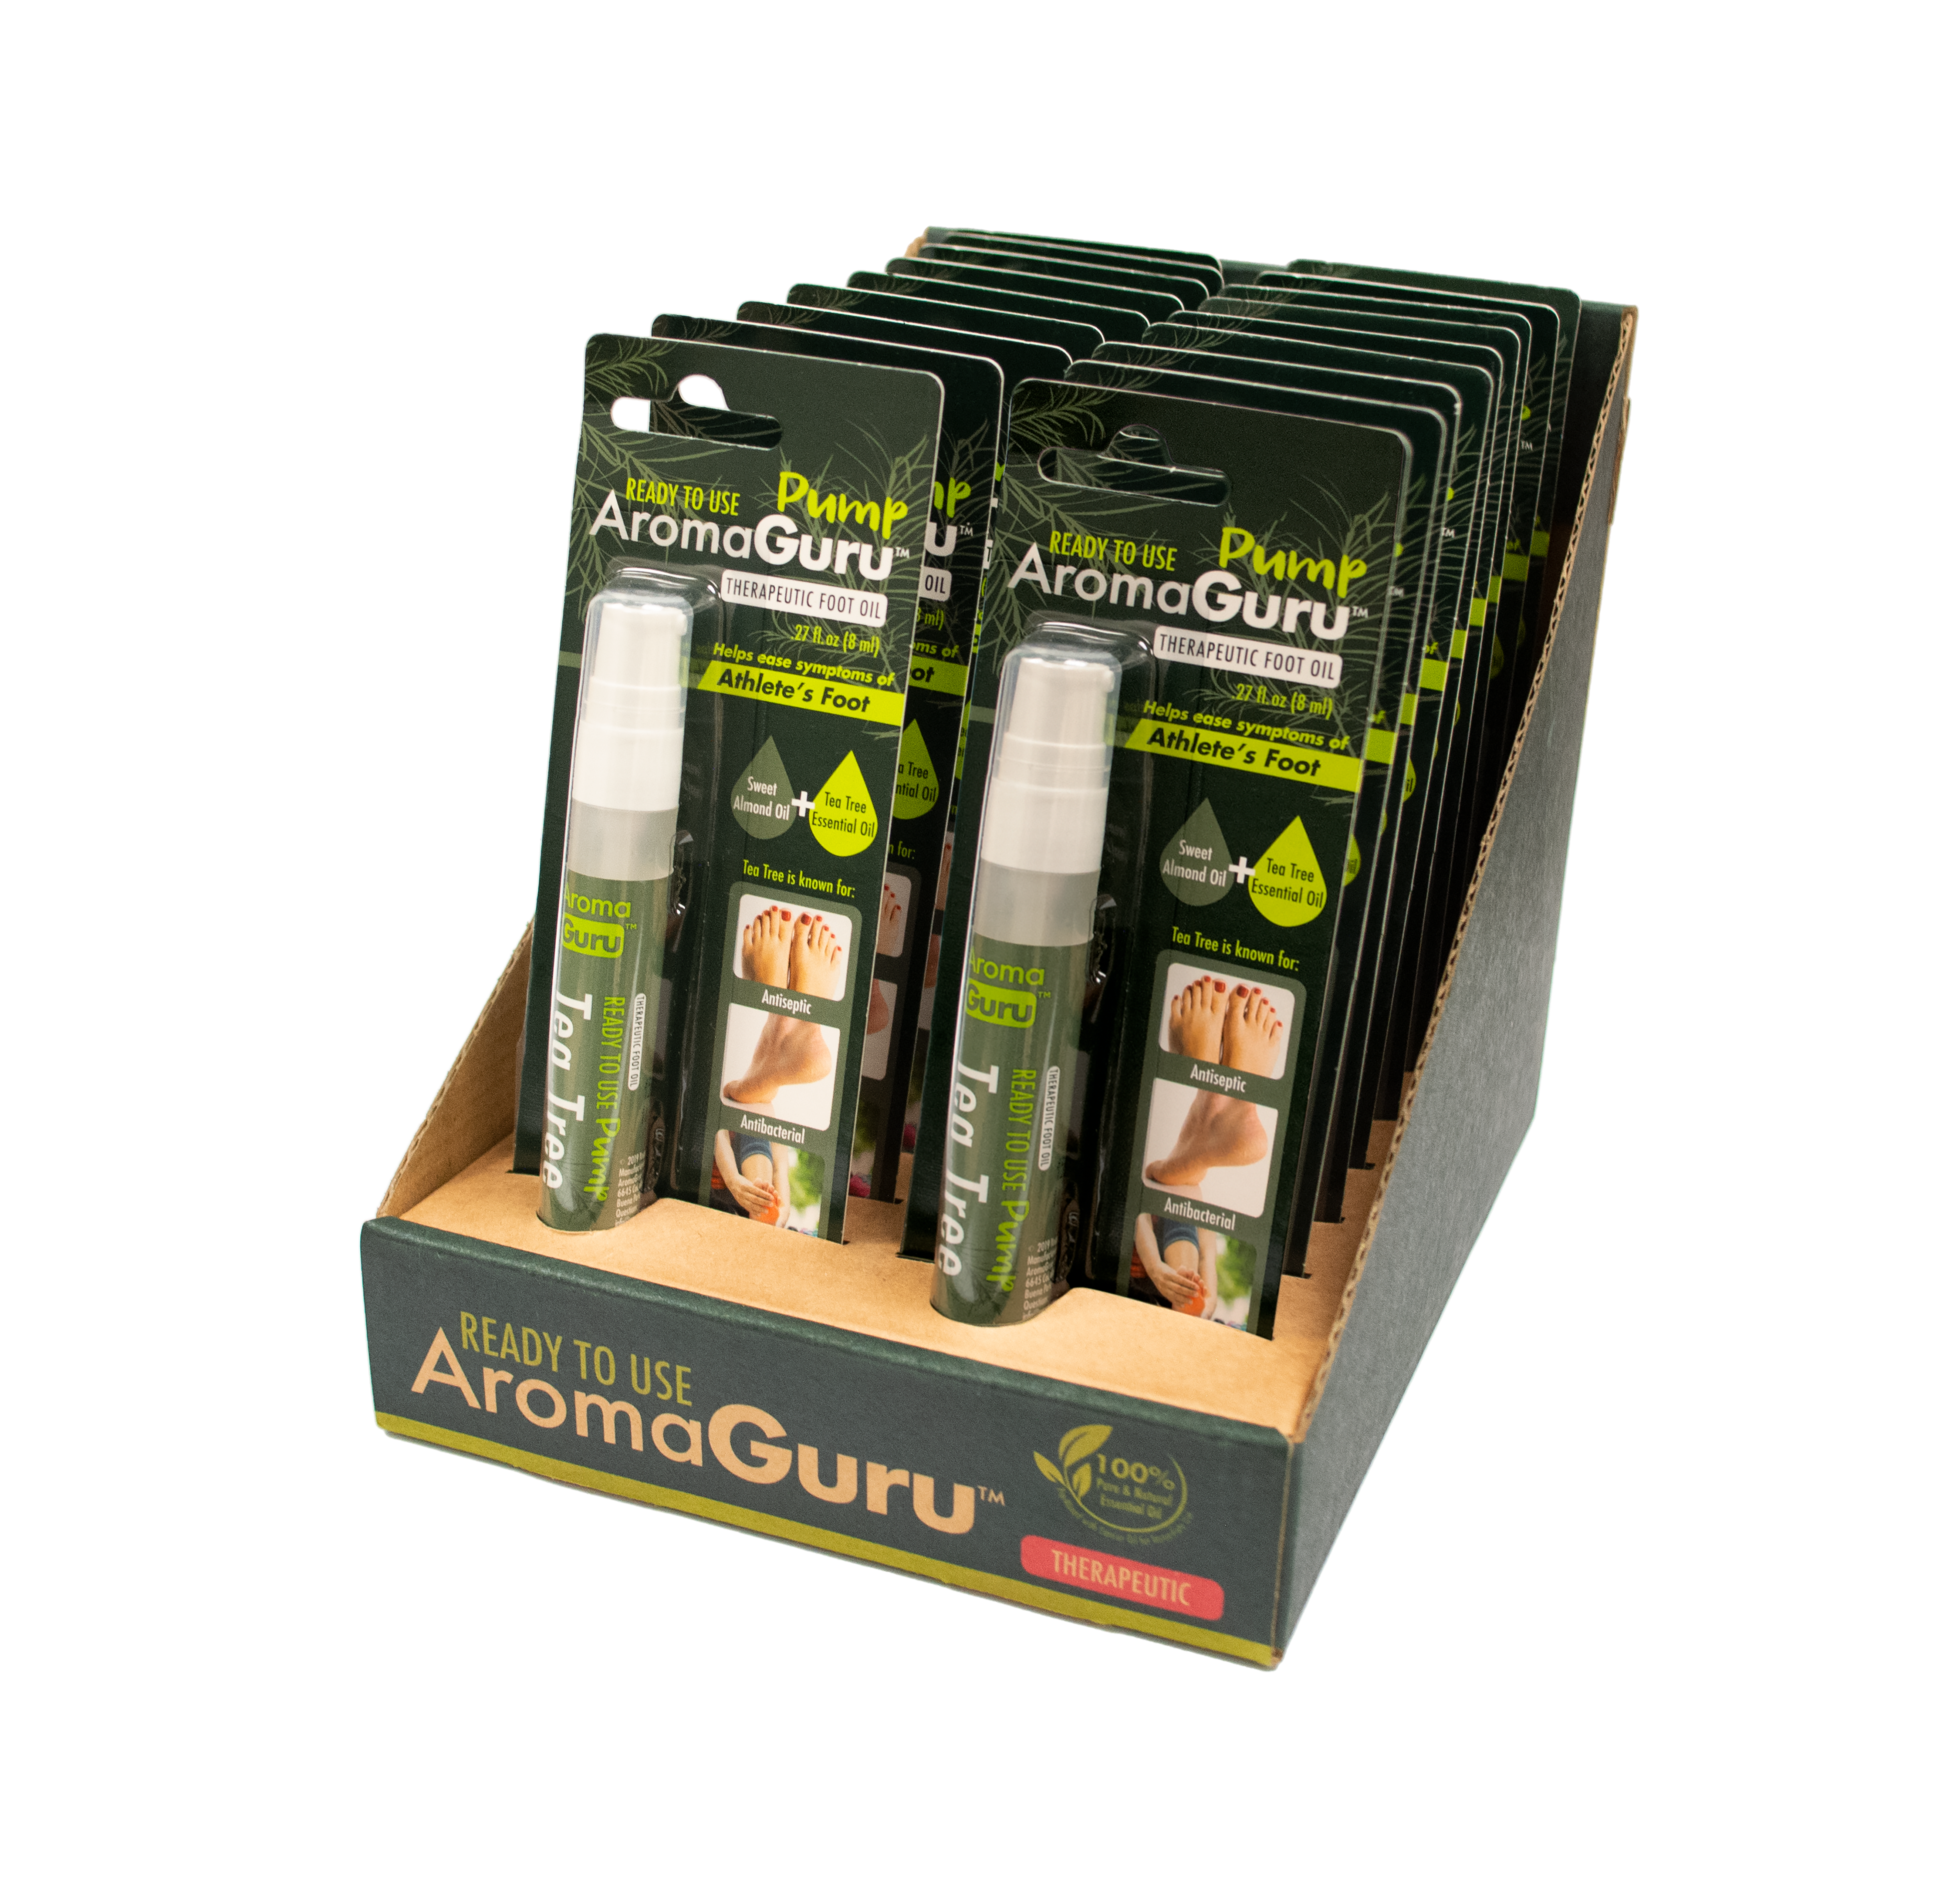 AromaGuru Tea Tree Pump (Pack of 18)- Wholesale Only, Contact to Purchase